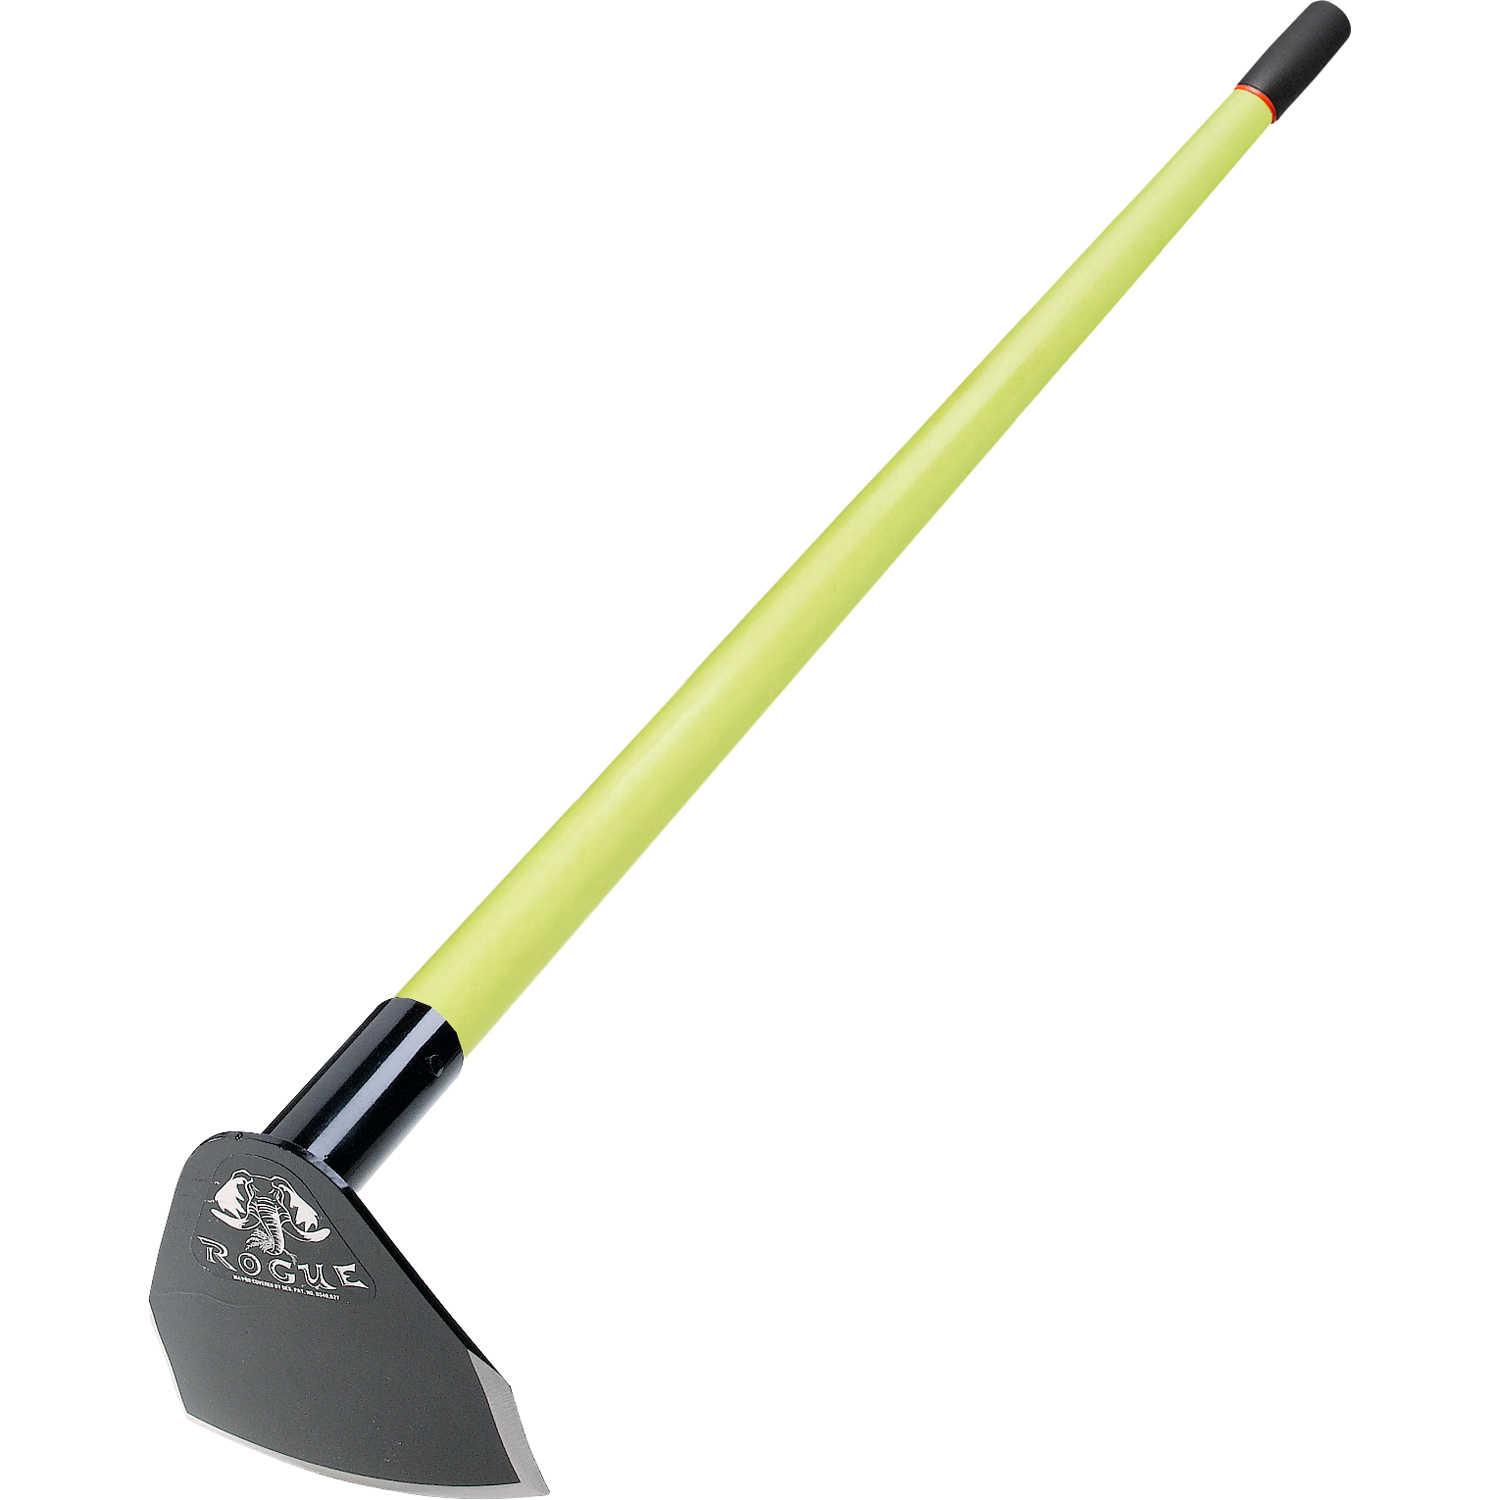 Rogue Hoe Field Hoes | Forestry Suppliers, Inc.